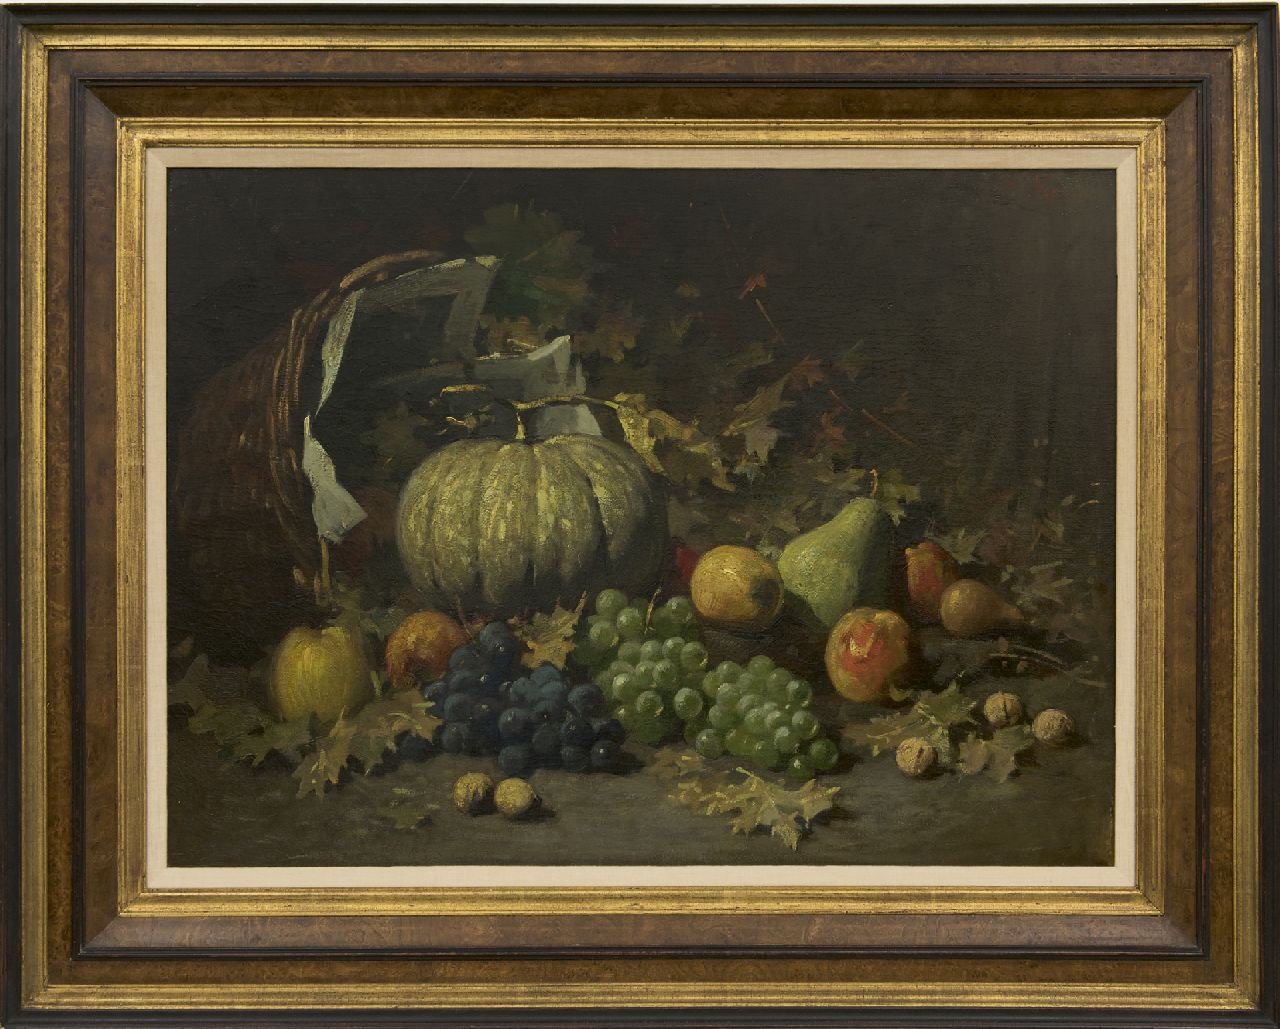 Kriens O.G.A.  | 'Otto' Gustav Adolf Kriens | Paintings offered for sale | Still life with fruit on a forest soil, oil on canvas 54.4 x 73.0 cm, signed u.r.